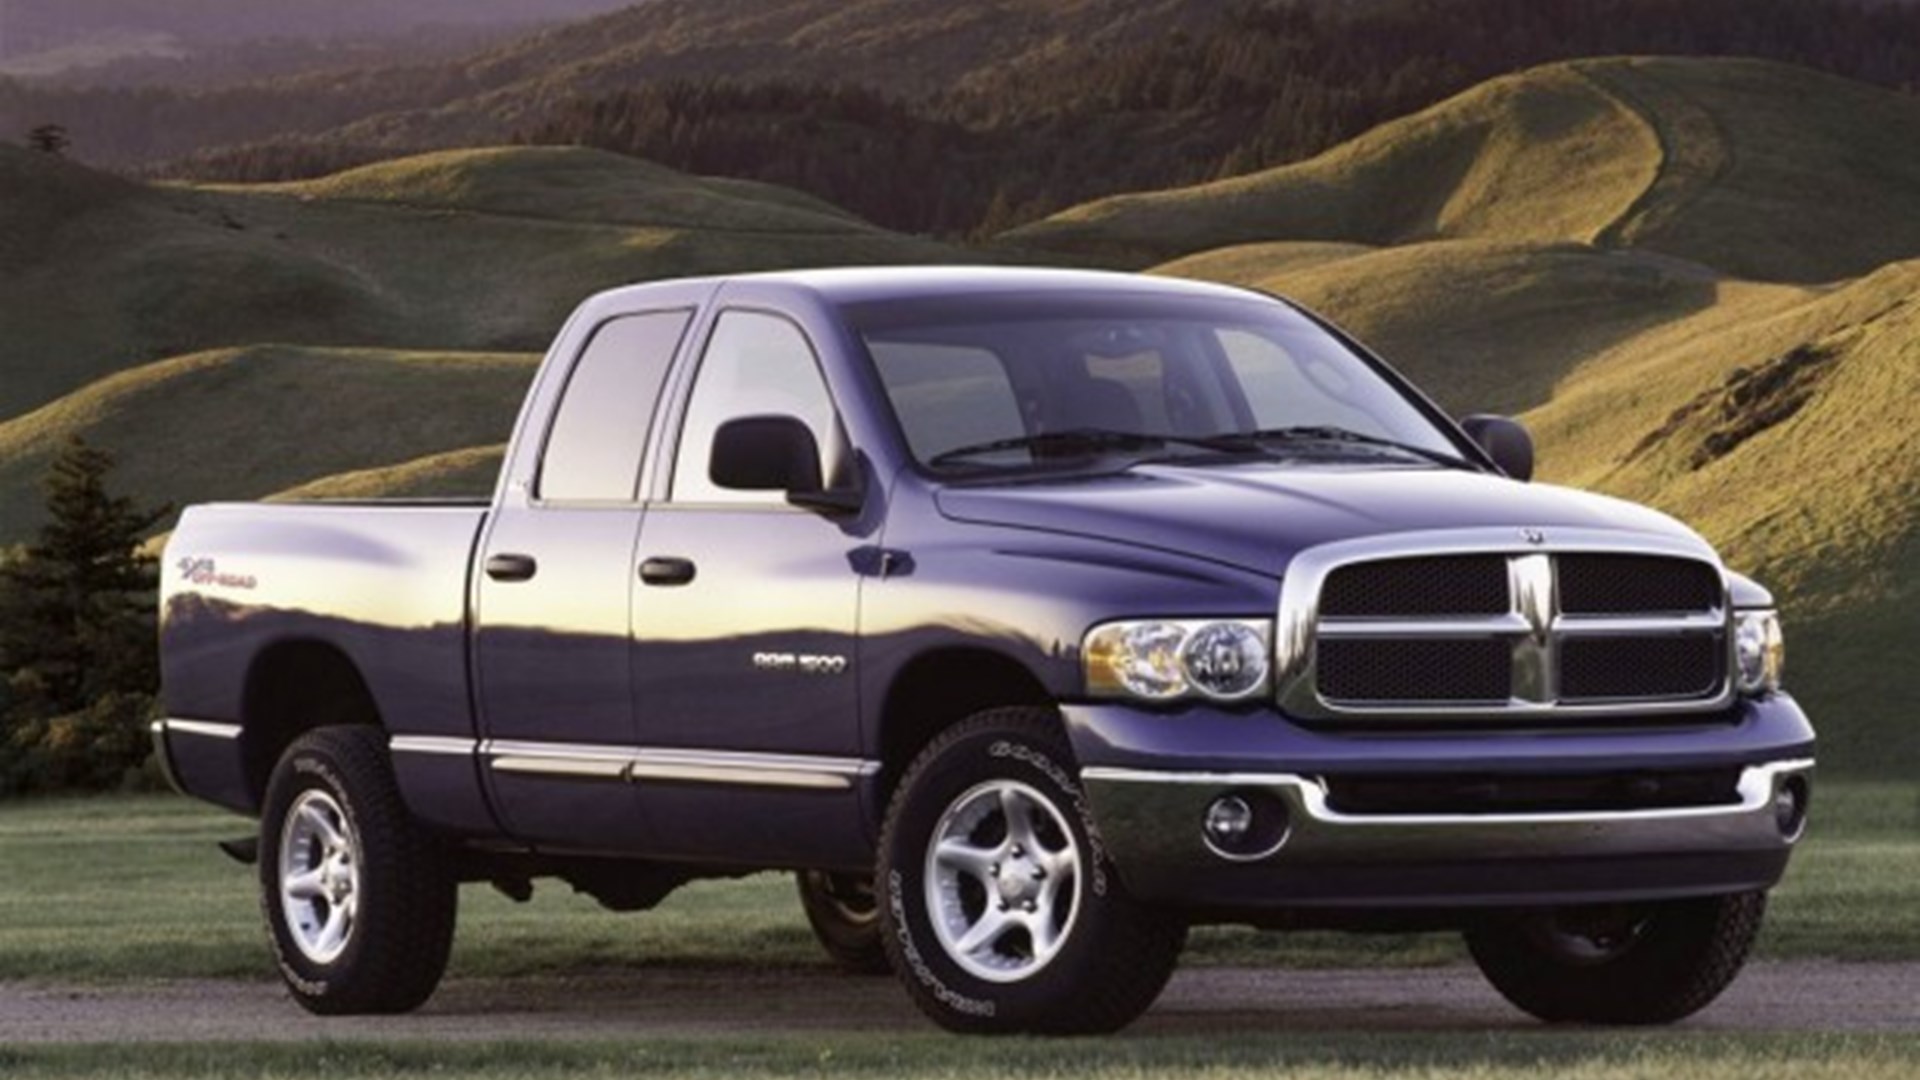 Used Vehicle Reviews: 2002-2008 Dodge Ram 1500 Review | AutoTrader.ca